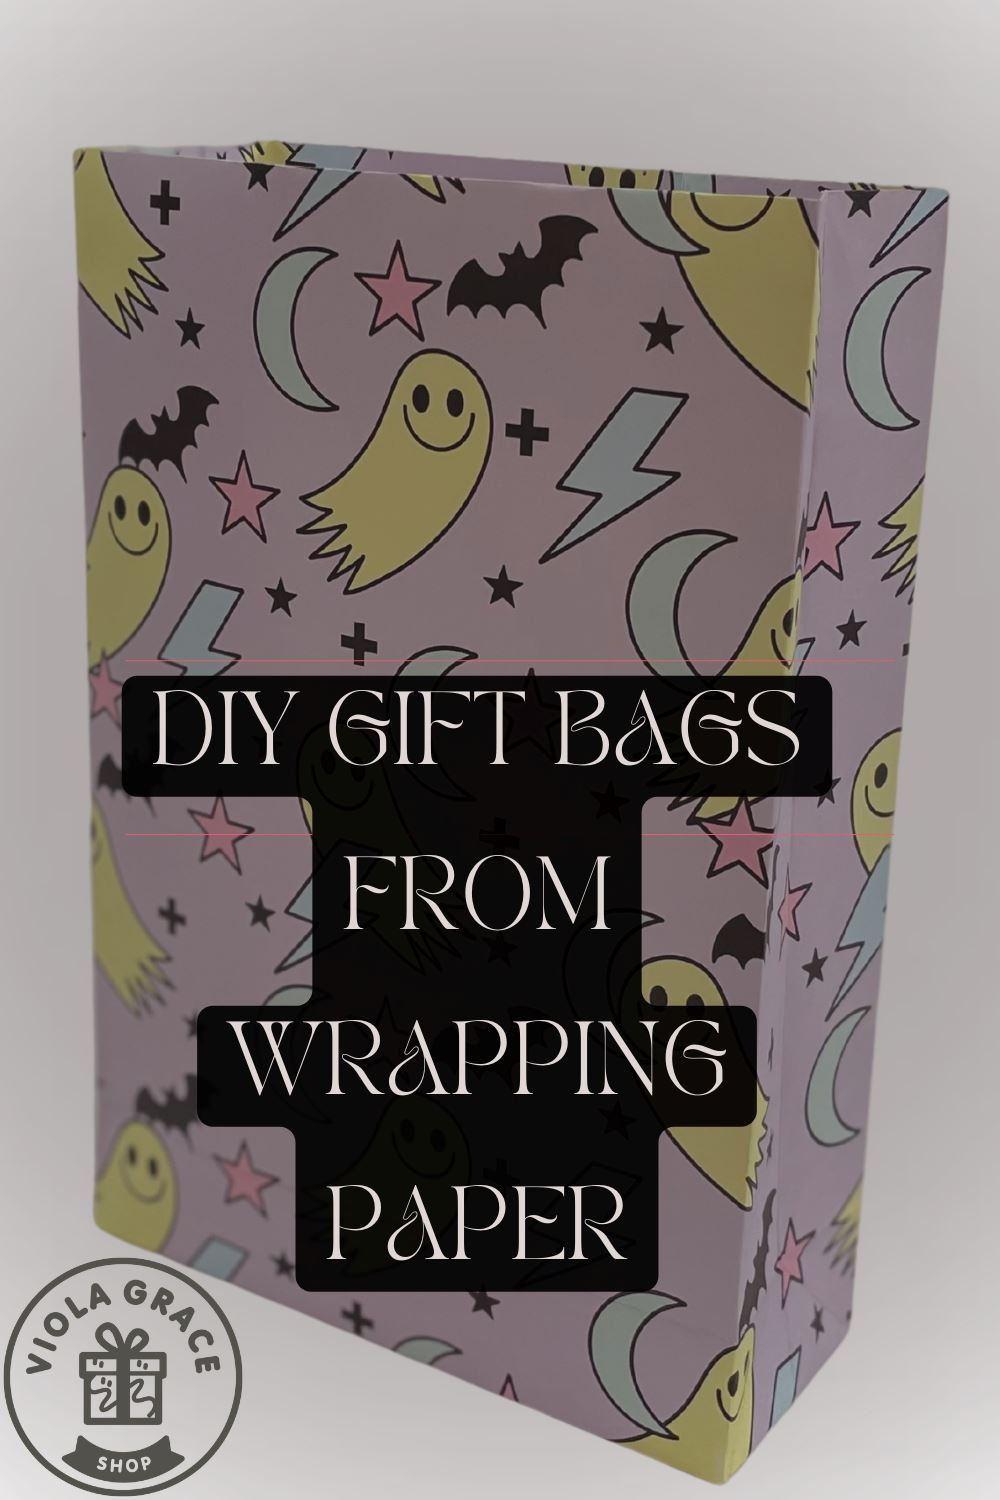 DIY Gift Bags Using Wrapping Paper